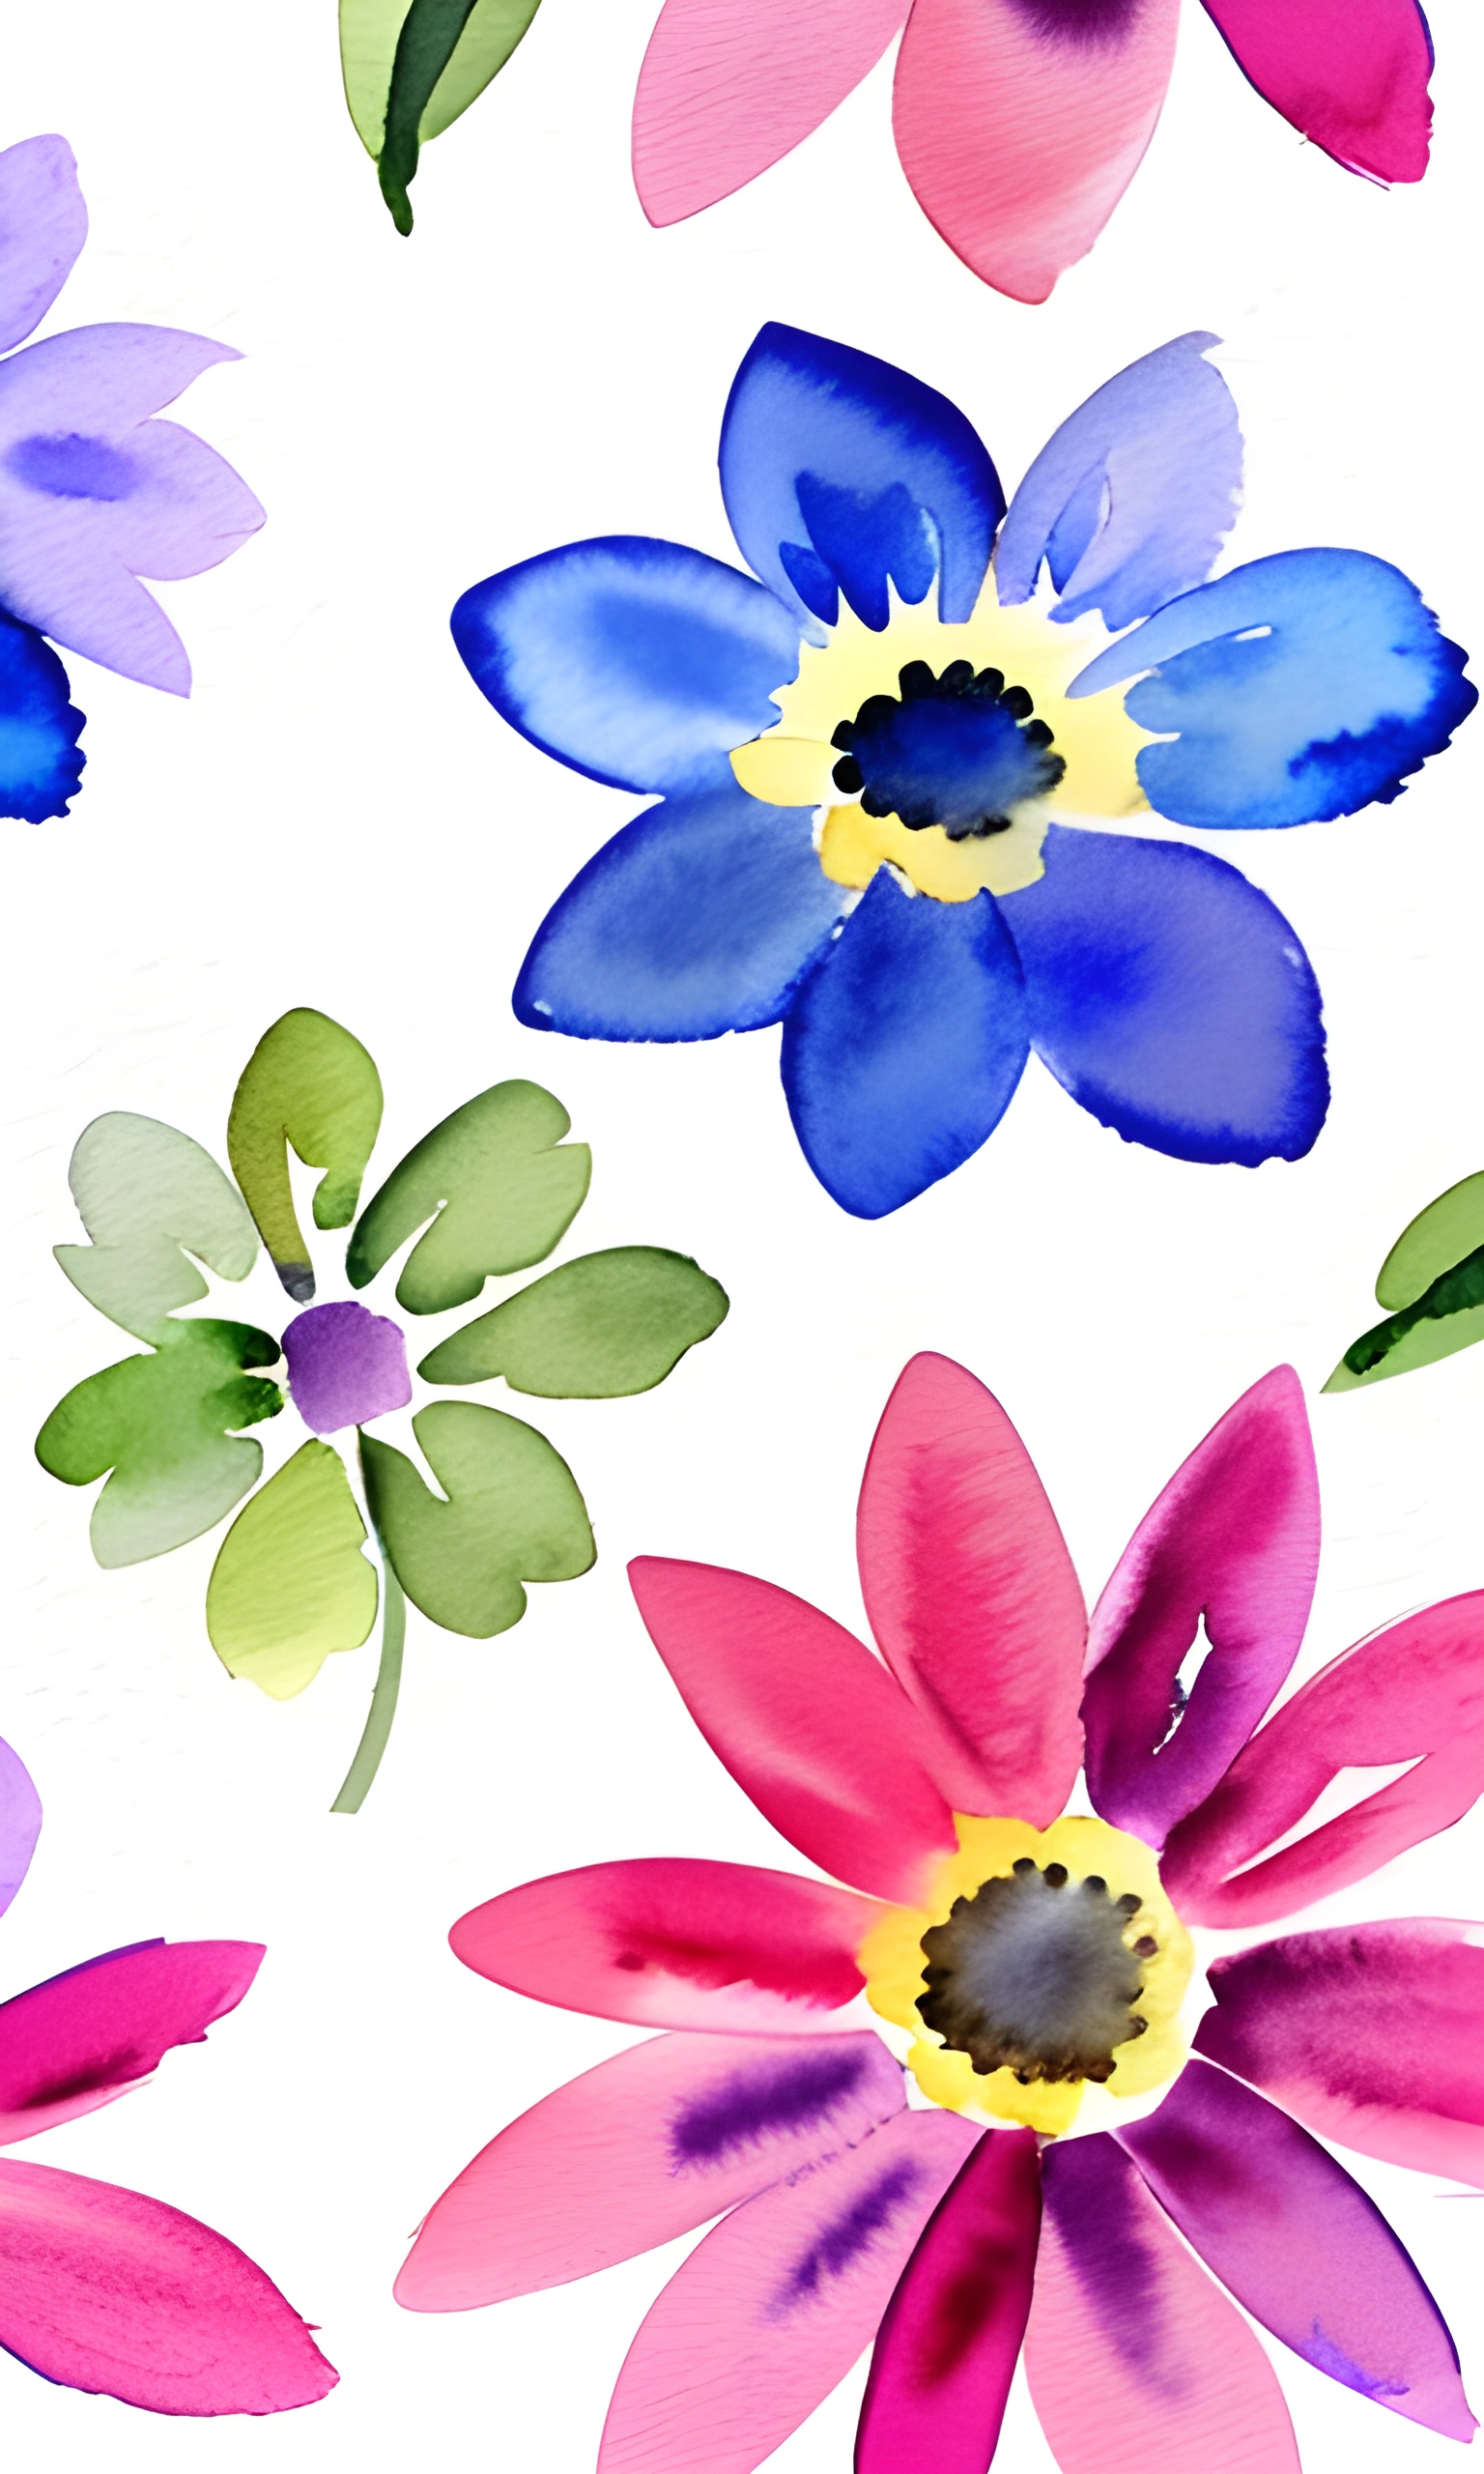 there are many different colored flowers on a white background